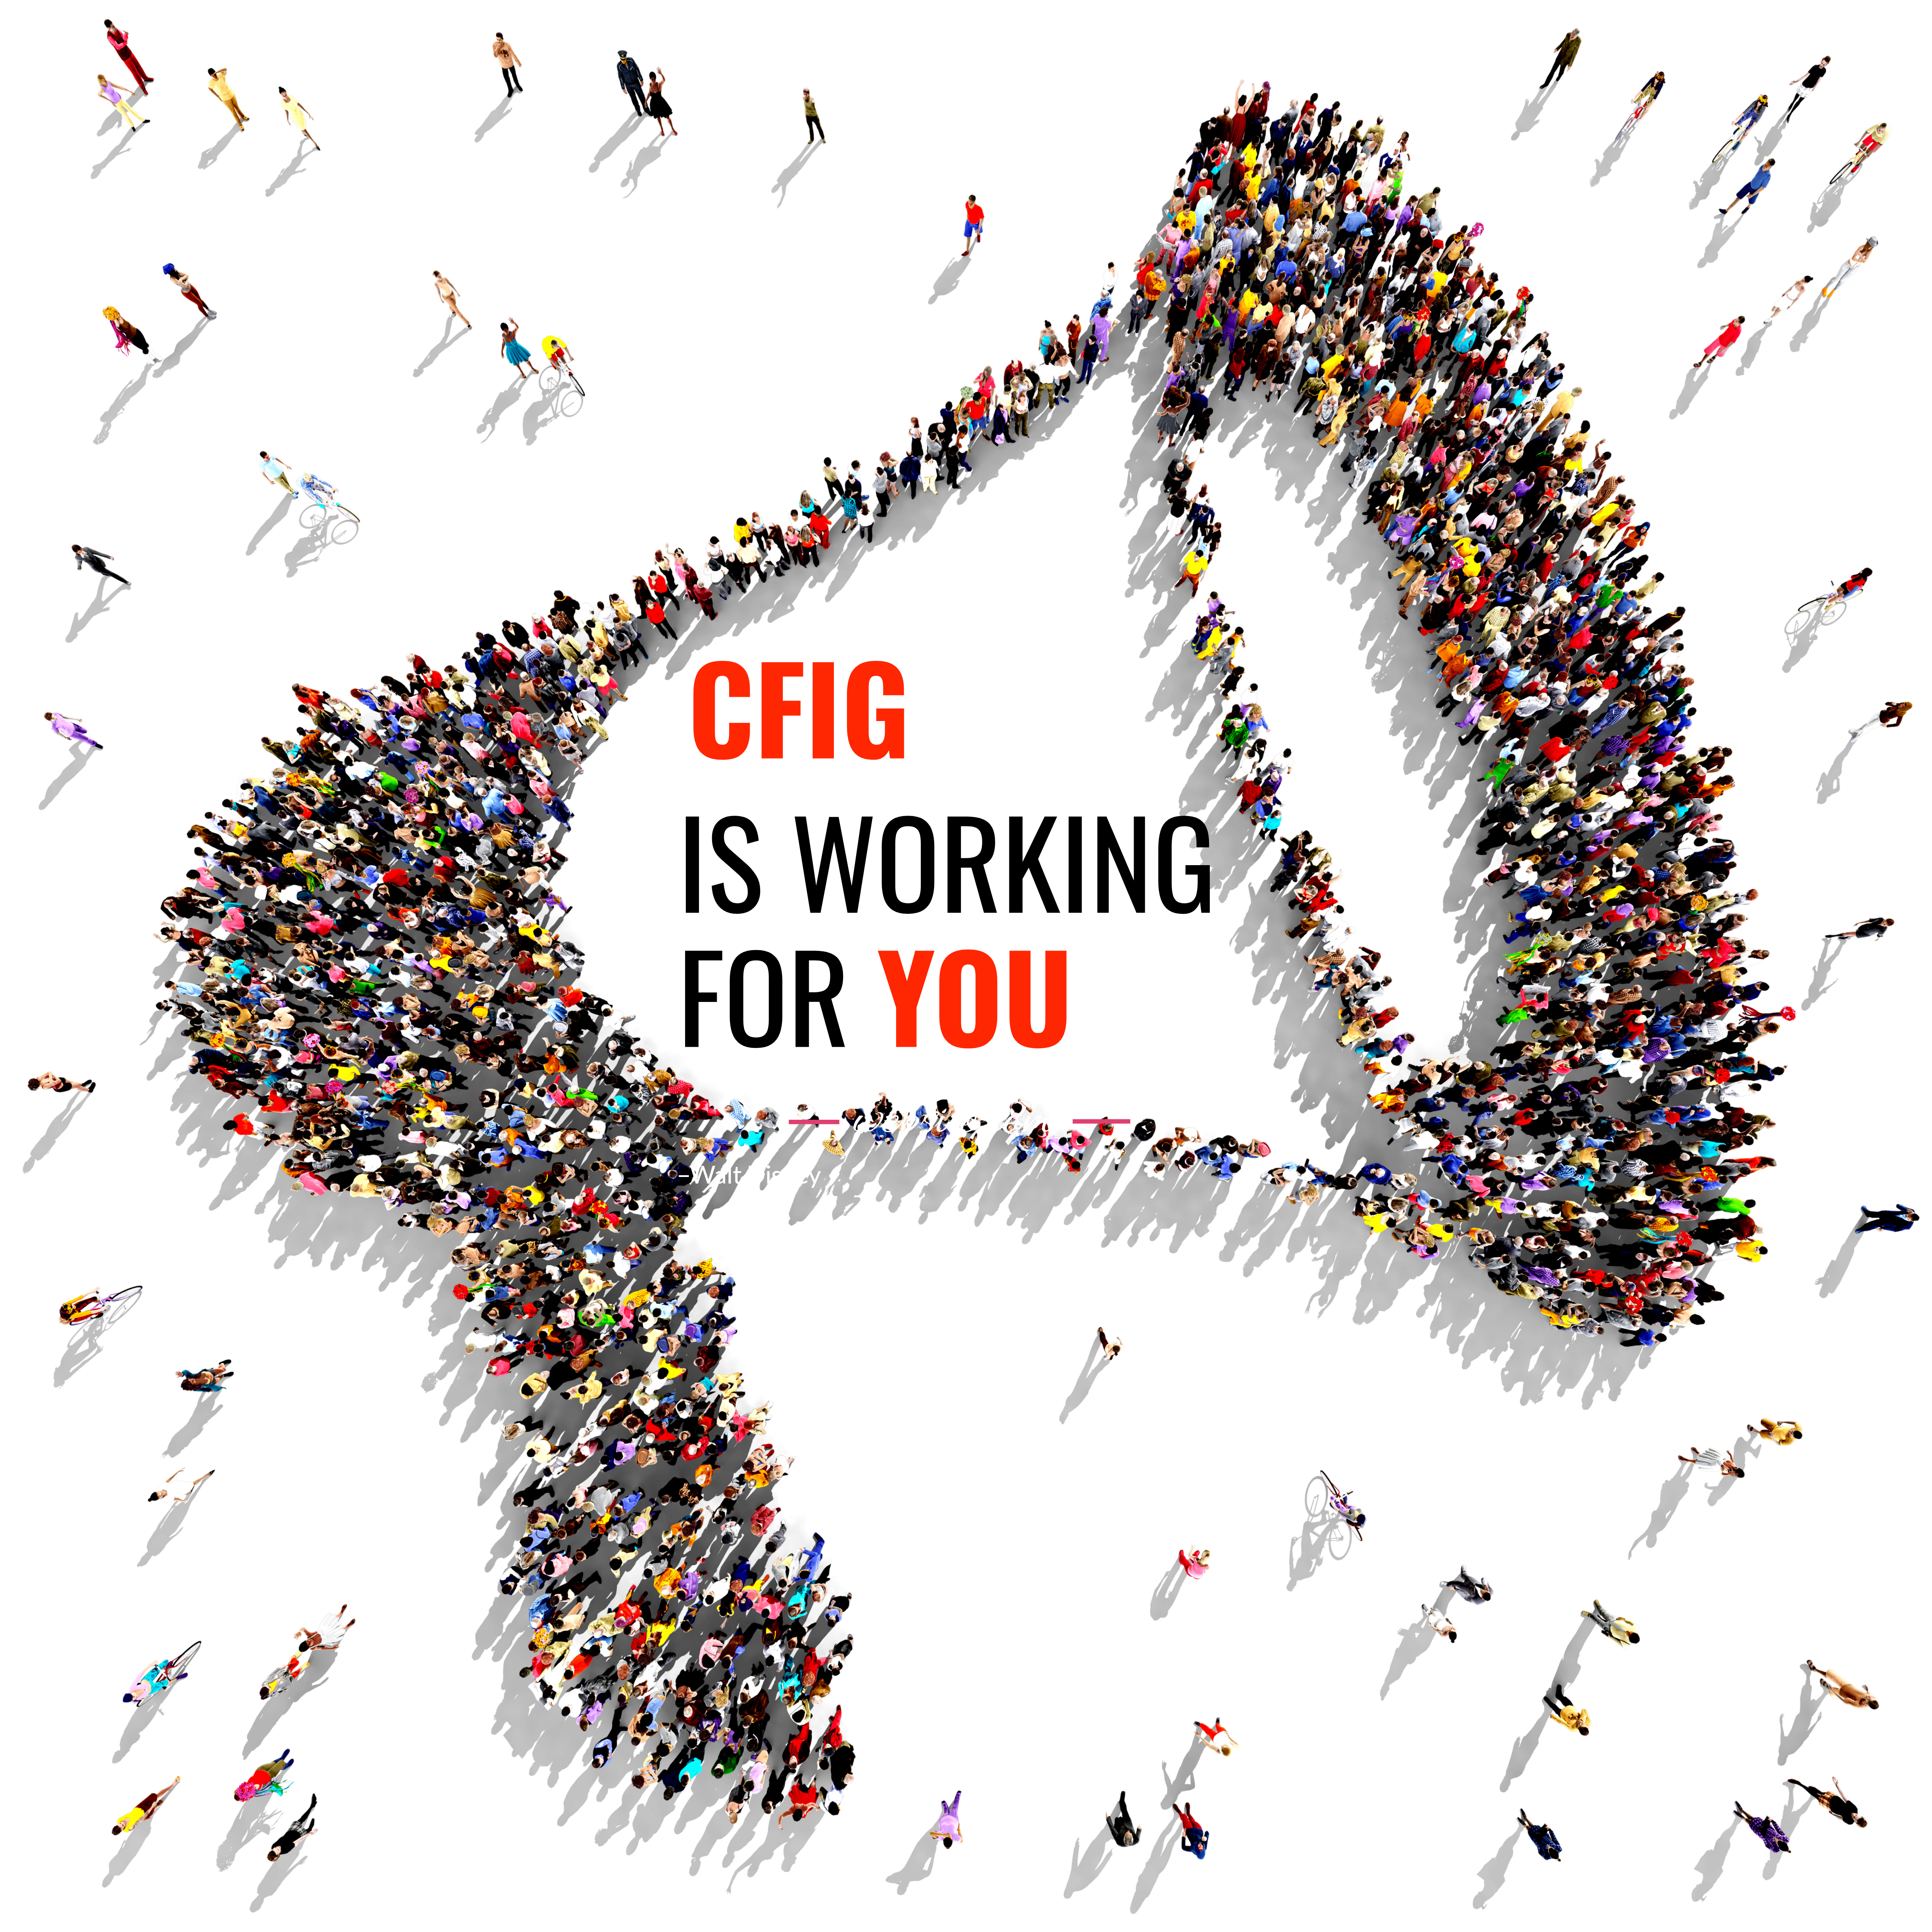 CFIG Continues to Work for Independents